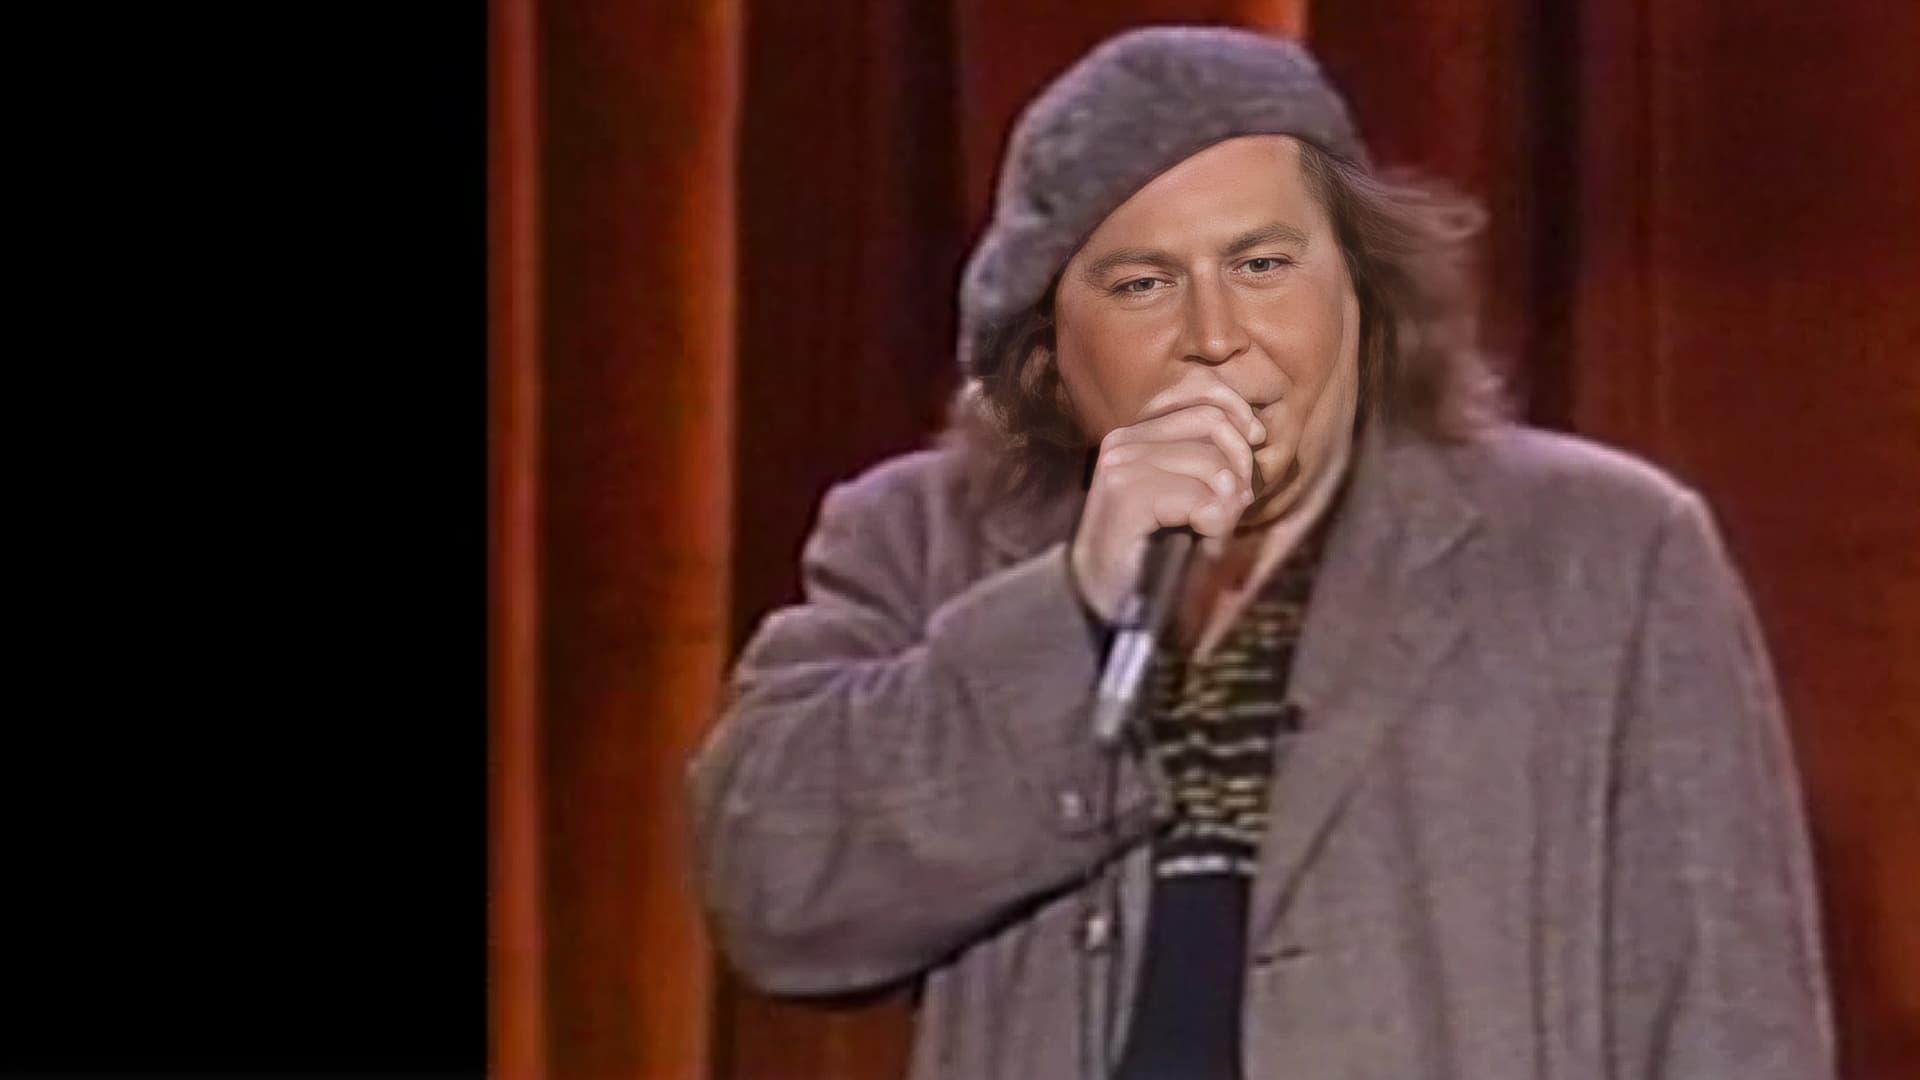 Sam Kinison: Why Did We Laugh? backdrop